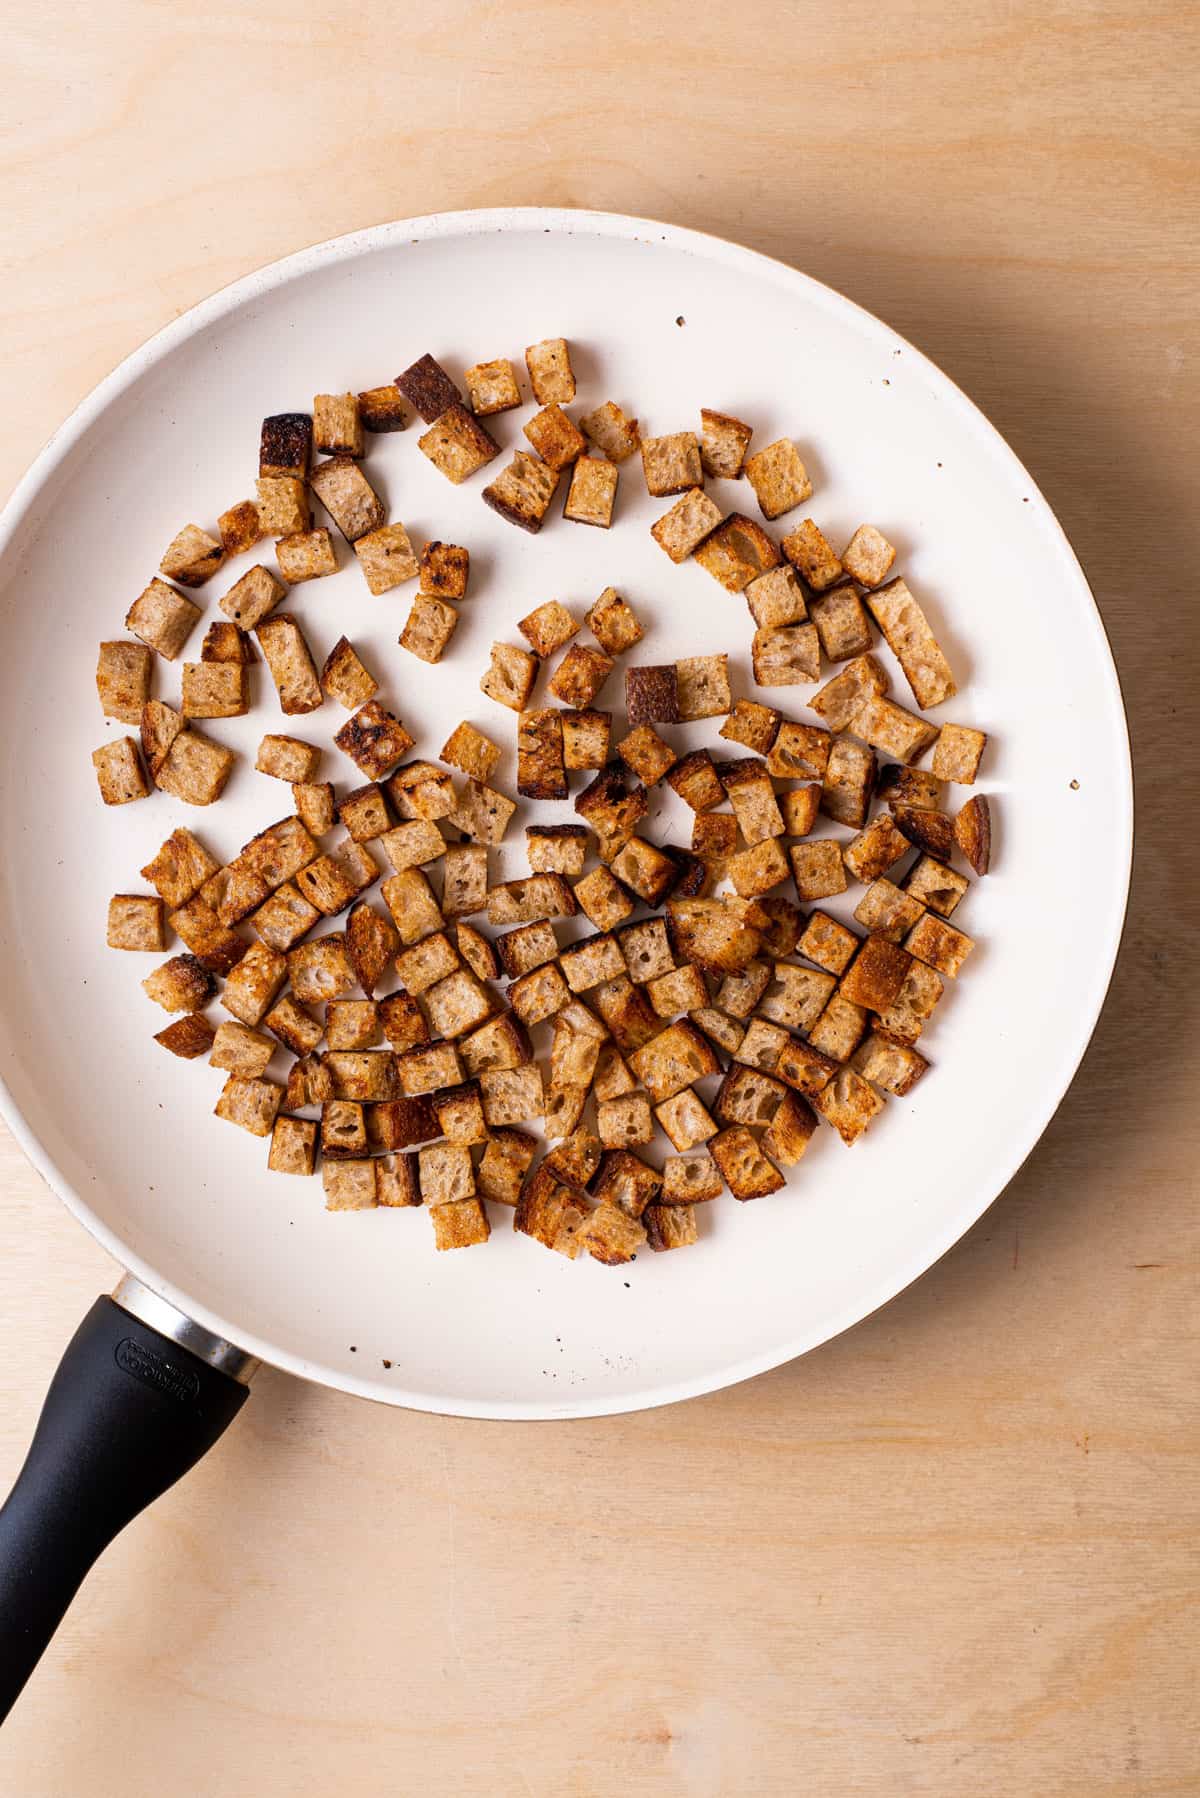 Homemade croutons in a skillet.